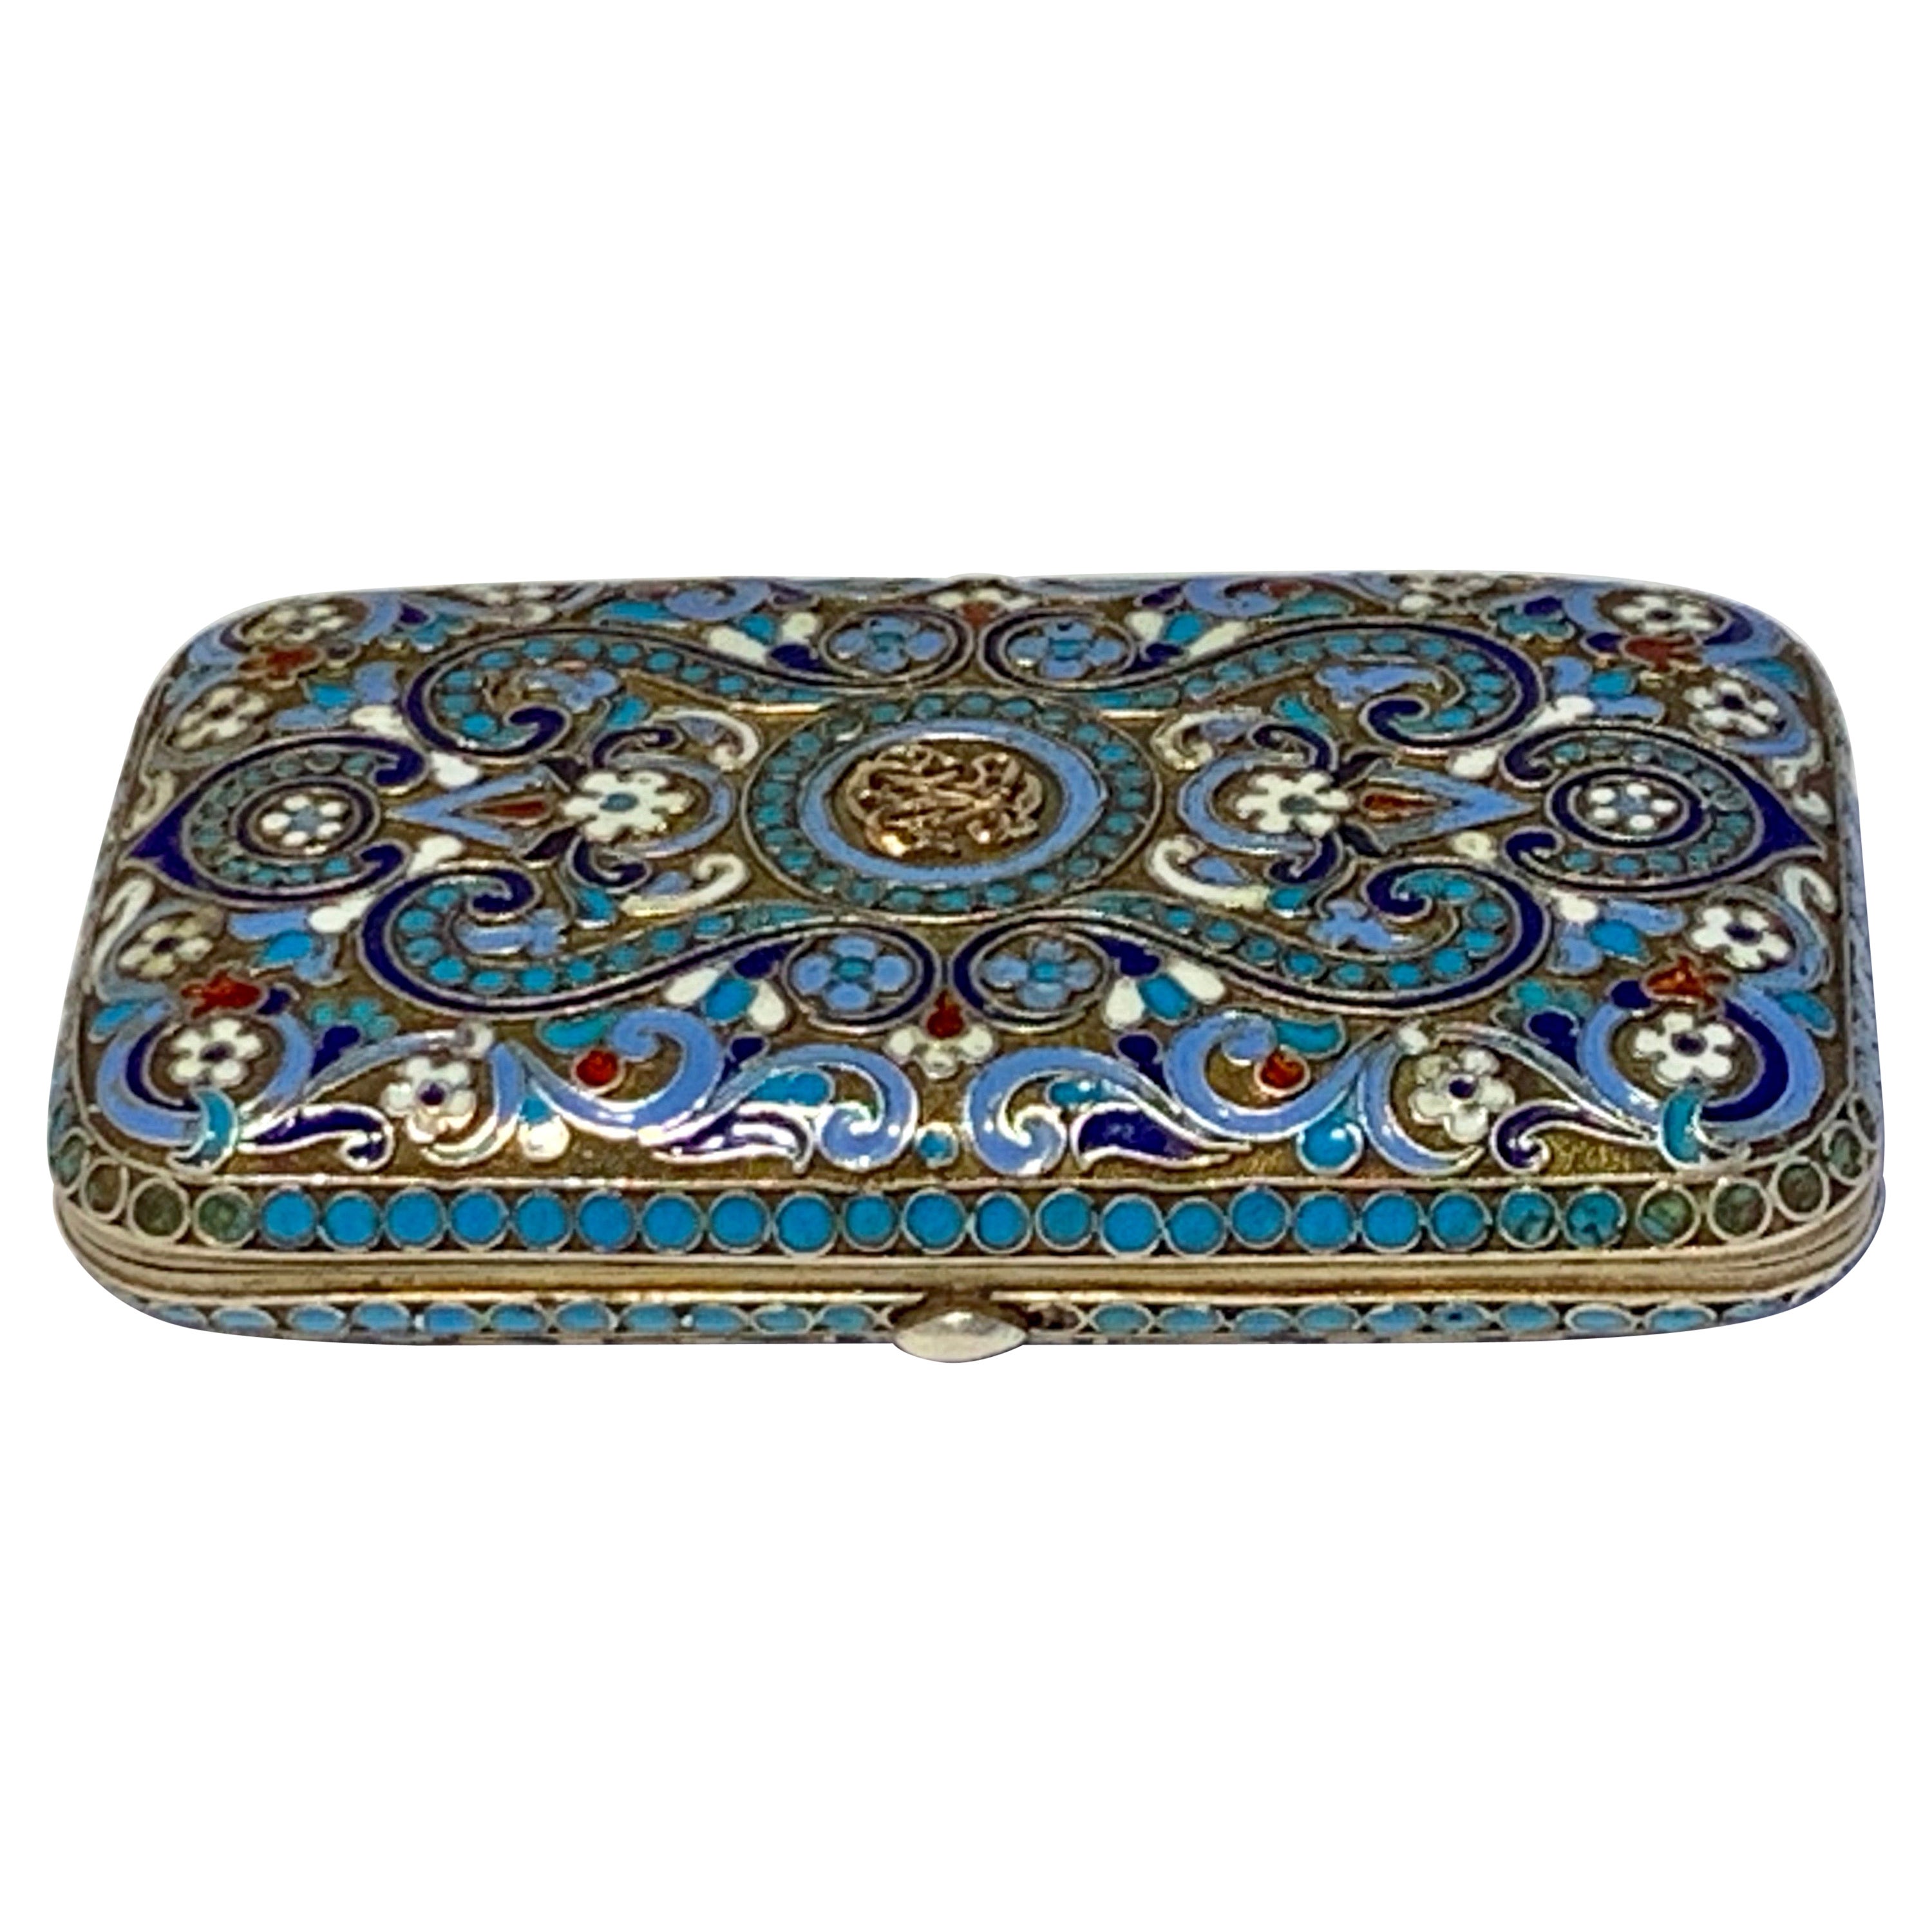 Russian Silver-Gilt and Cloisonne Enamel Box